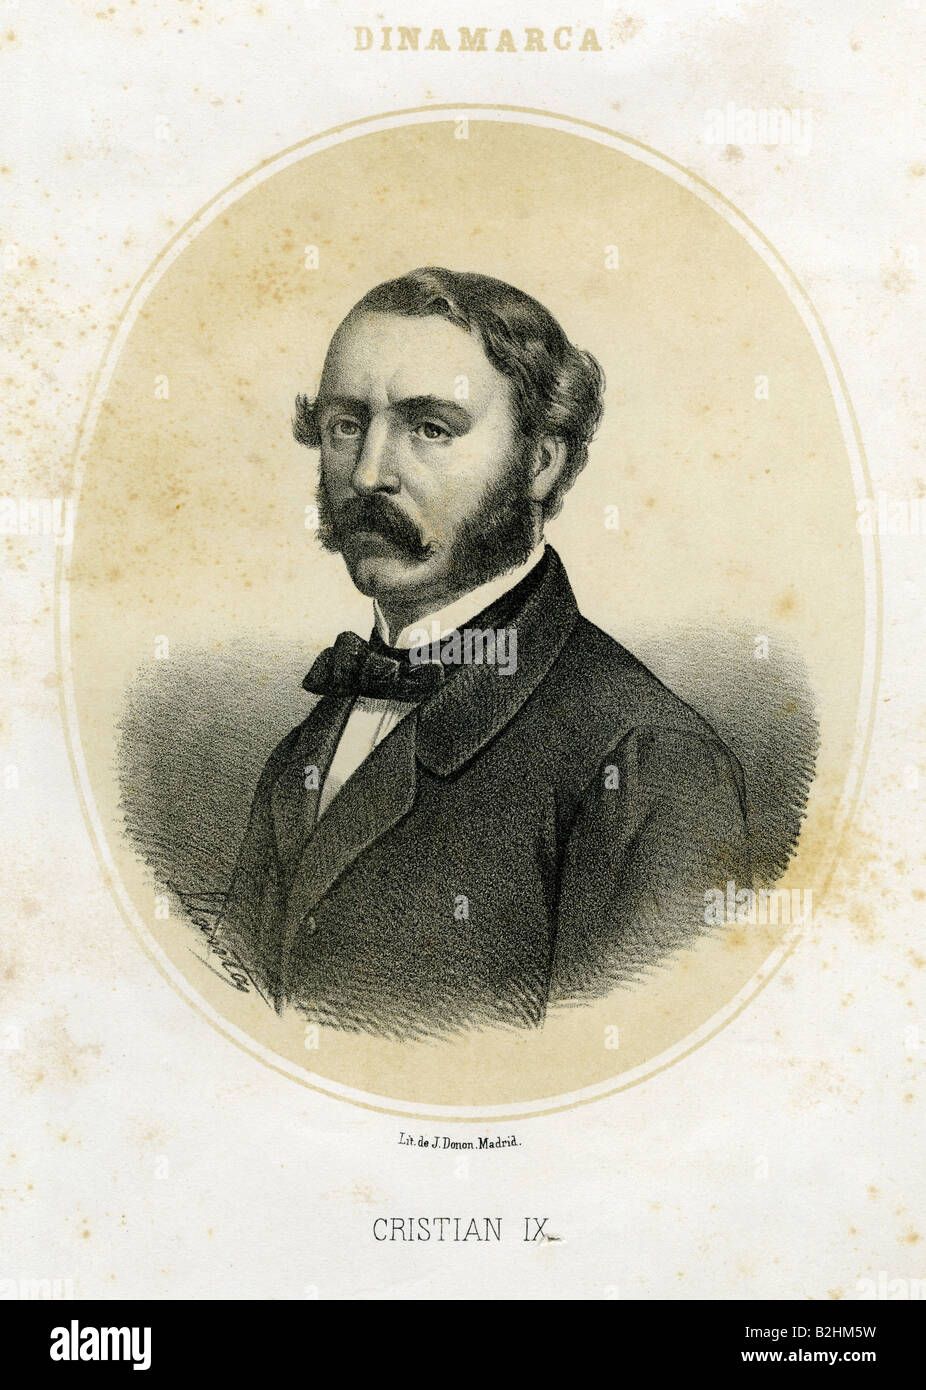 Christian IX, King of Denmark, 8.4.1818 - 29.1.1906, lithograph, by J. Donon, Madrid, Spain, mid 19th century, Stock Photo